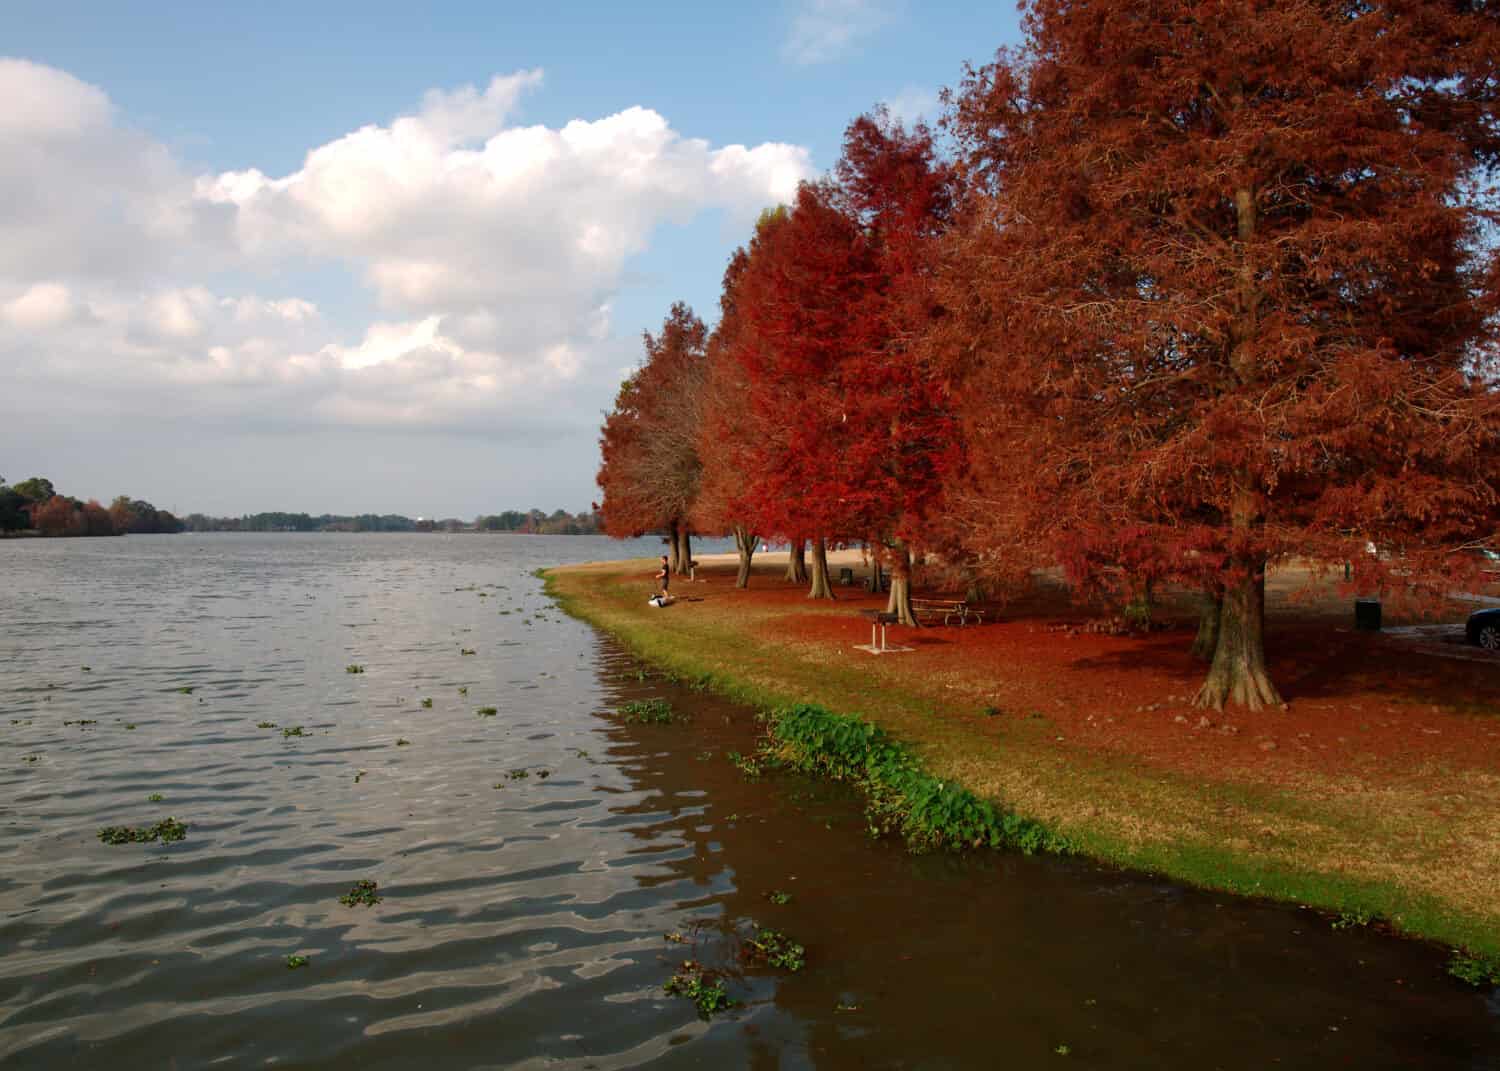 View of Cypress trees with red leaves at University Lake, Baton Rouge, Louisiana, USA